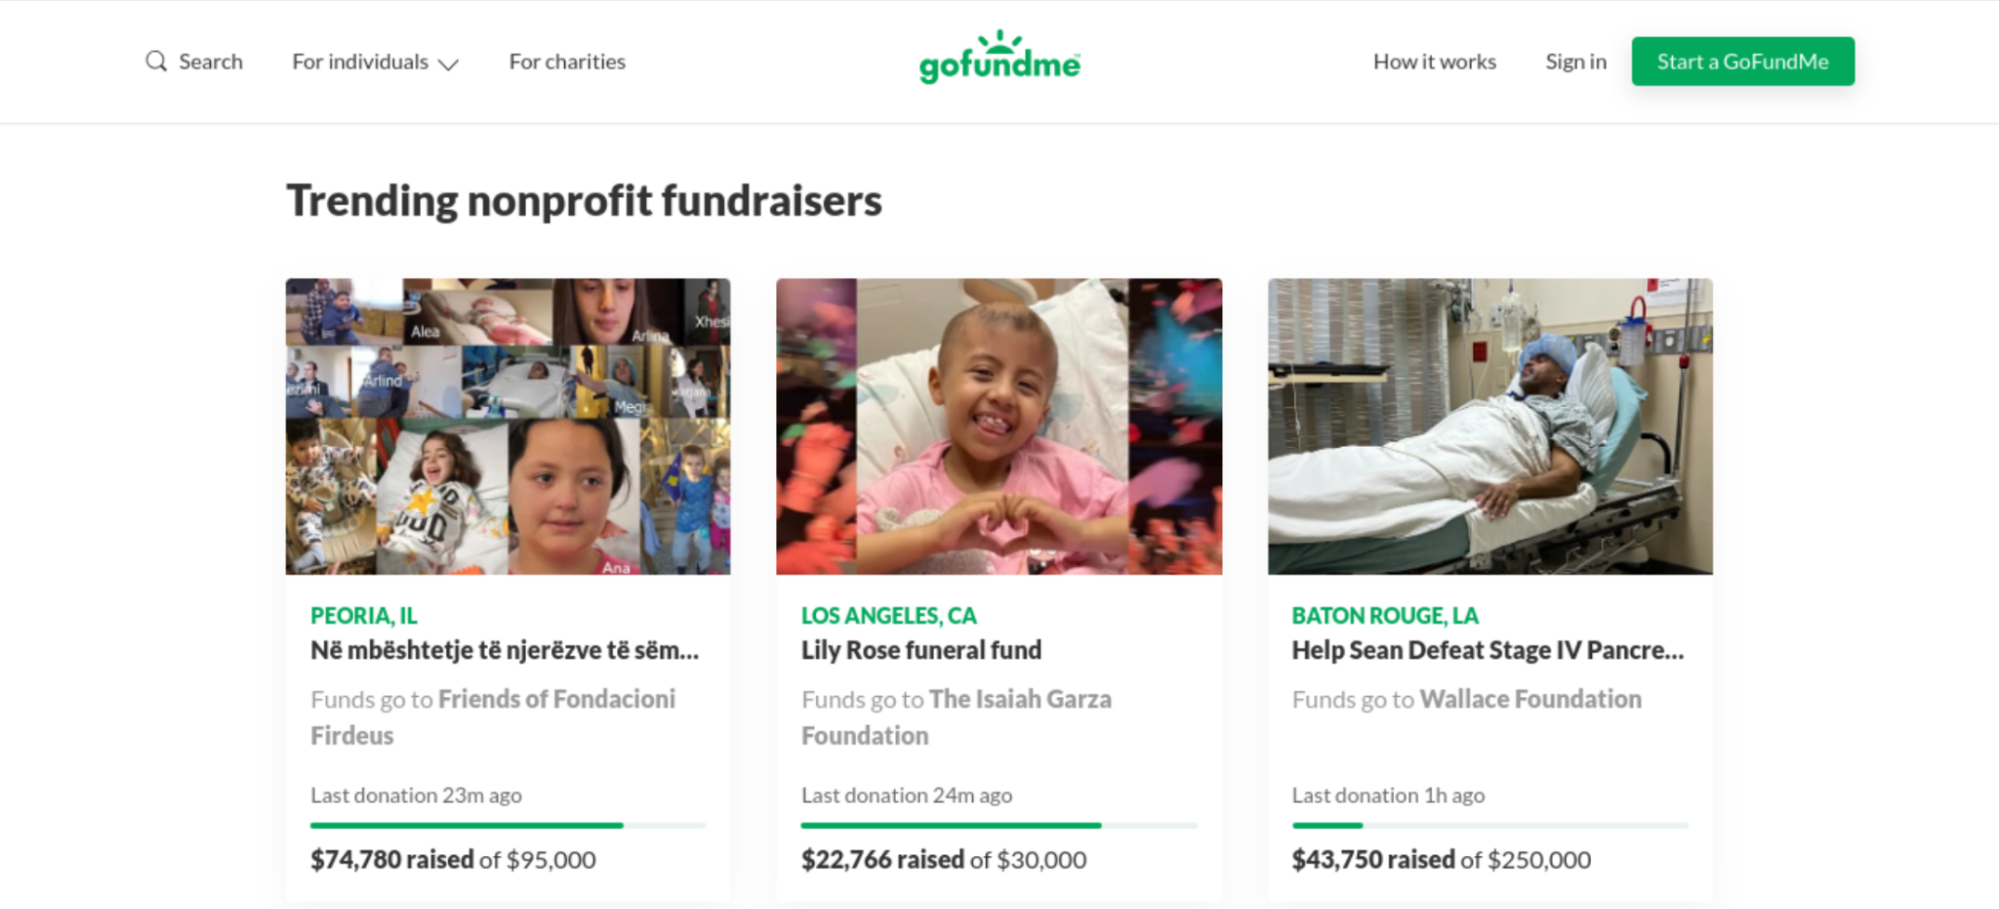 GoFundMe - a popular Crowdfunding site for individuals as well as charities